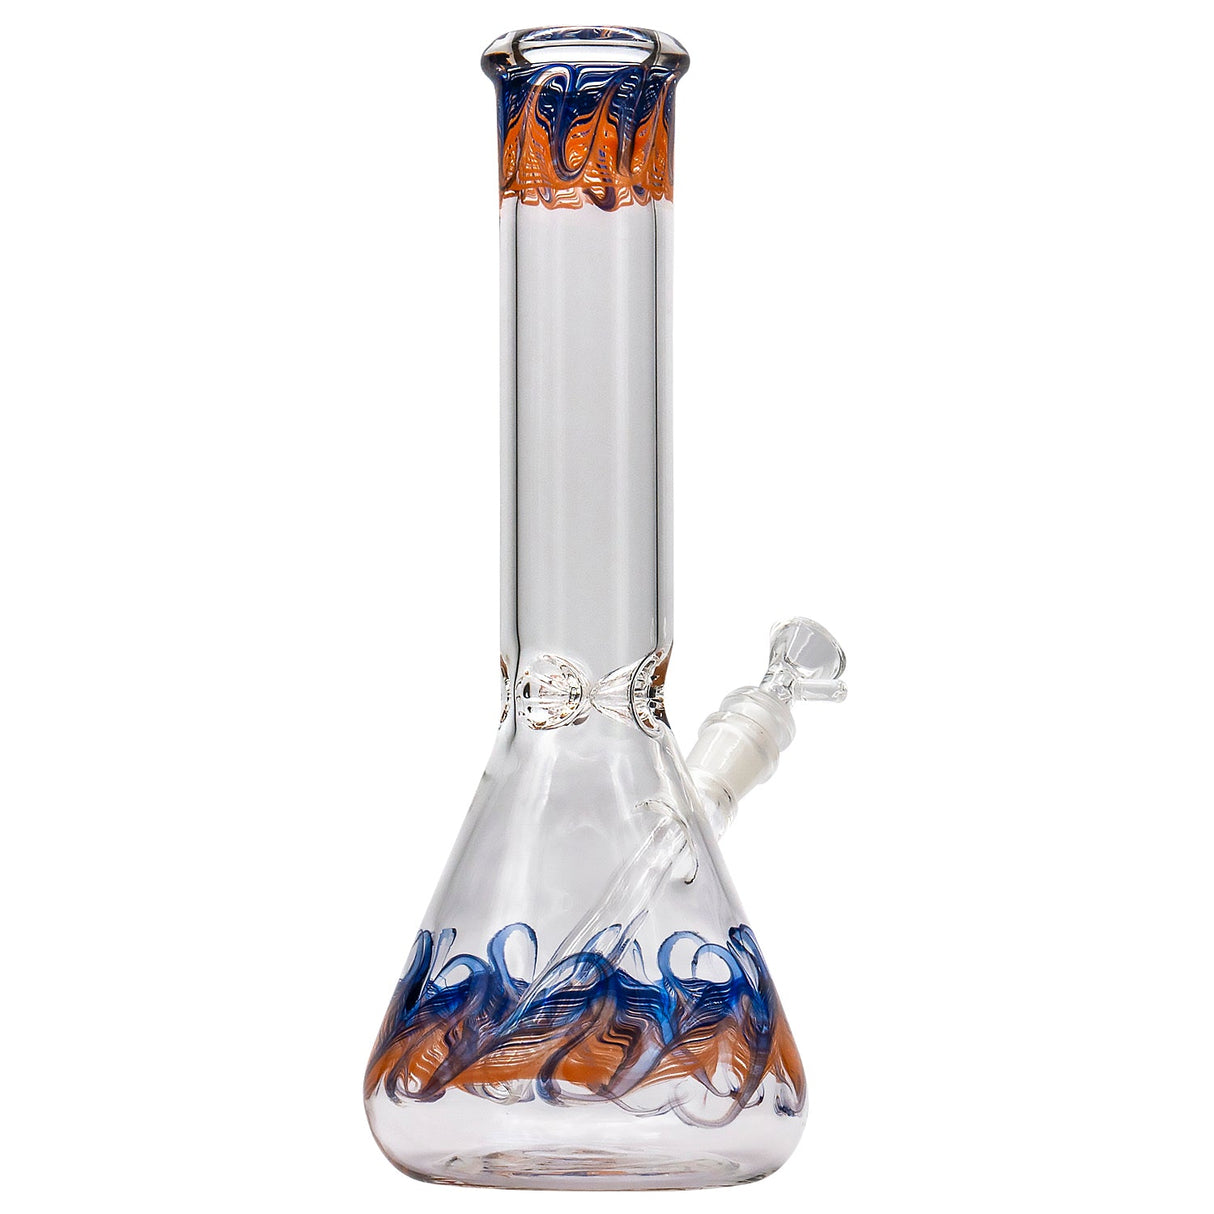 LA Pipes 'Phoenix Rising' 12-inch Beaker Bong with Color Wrap, Glass on Glass Joint